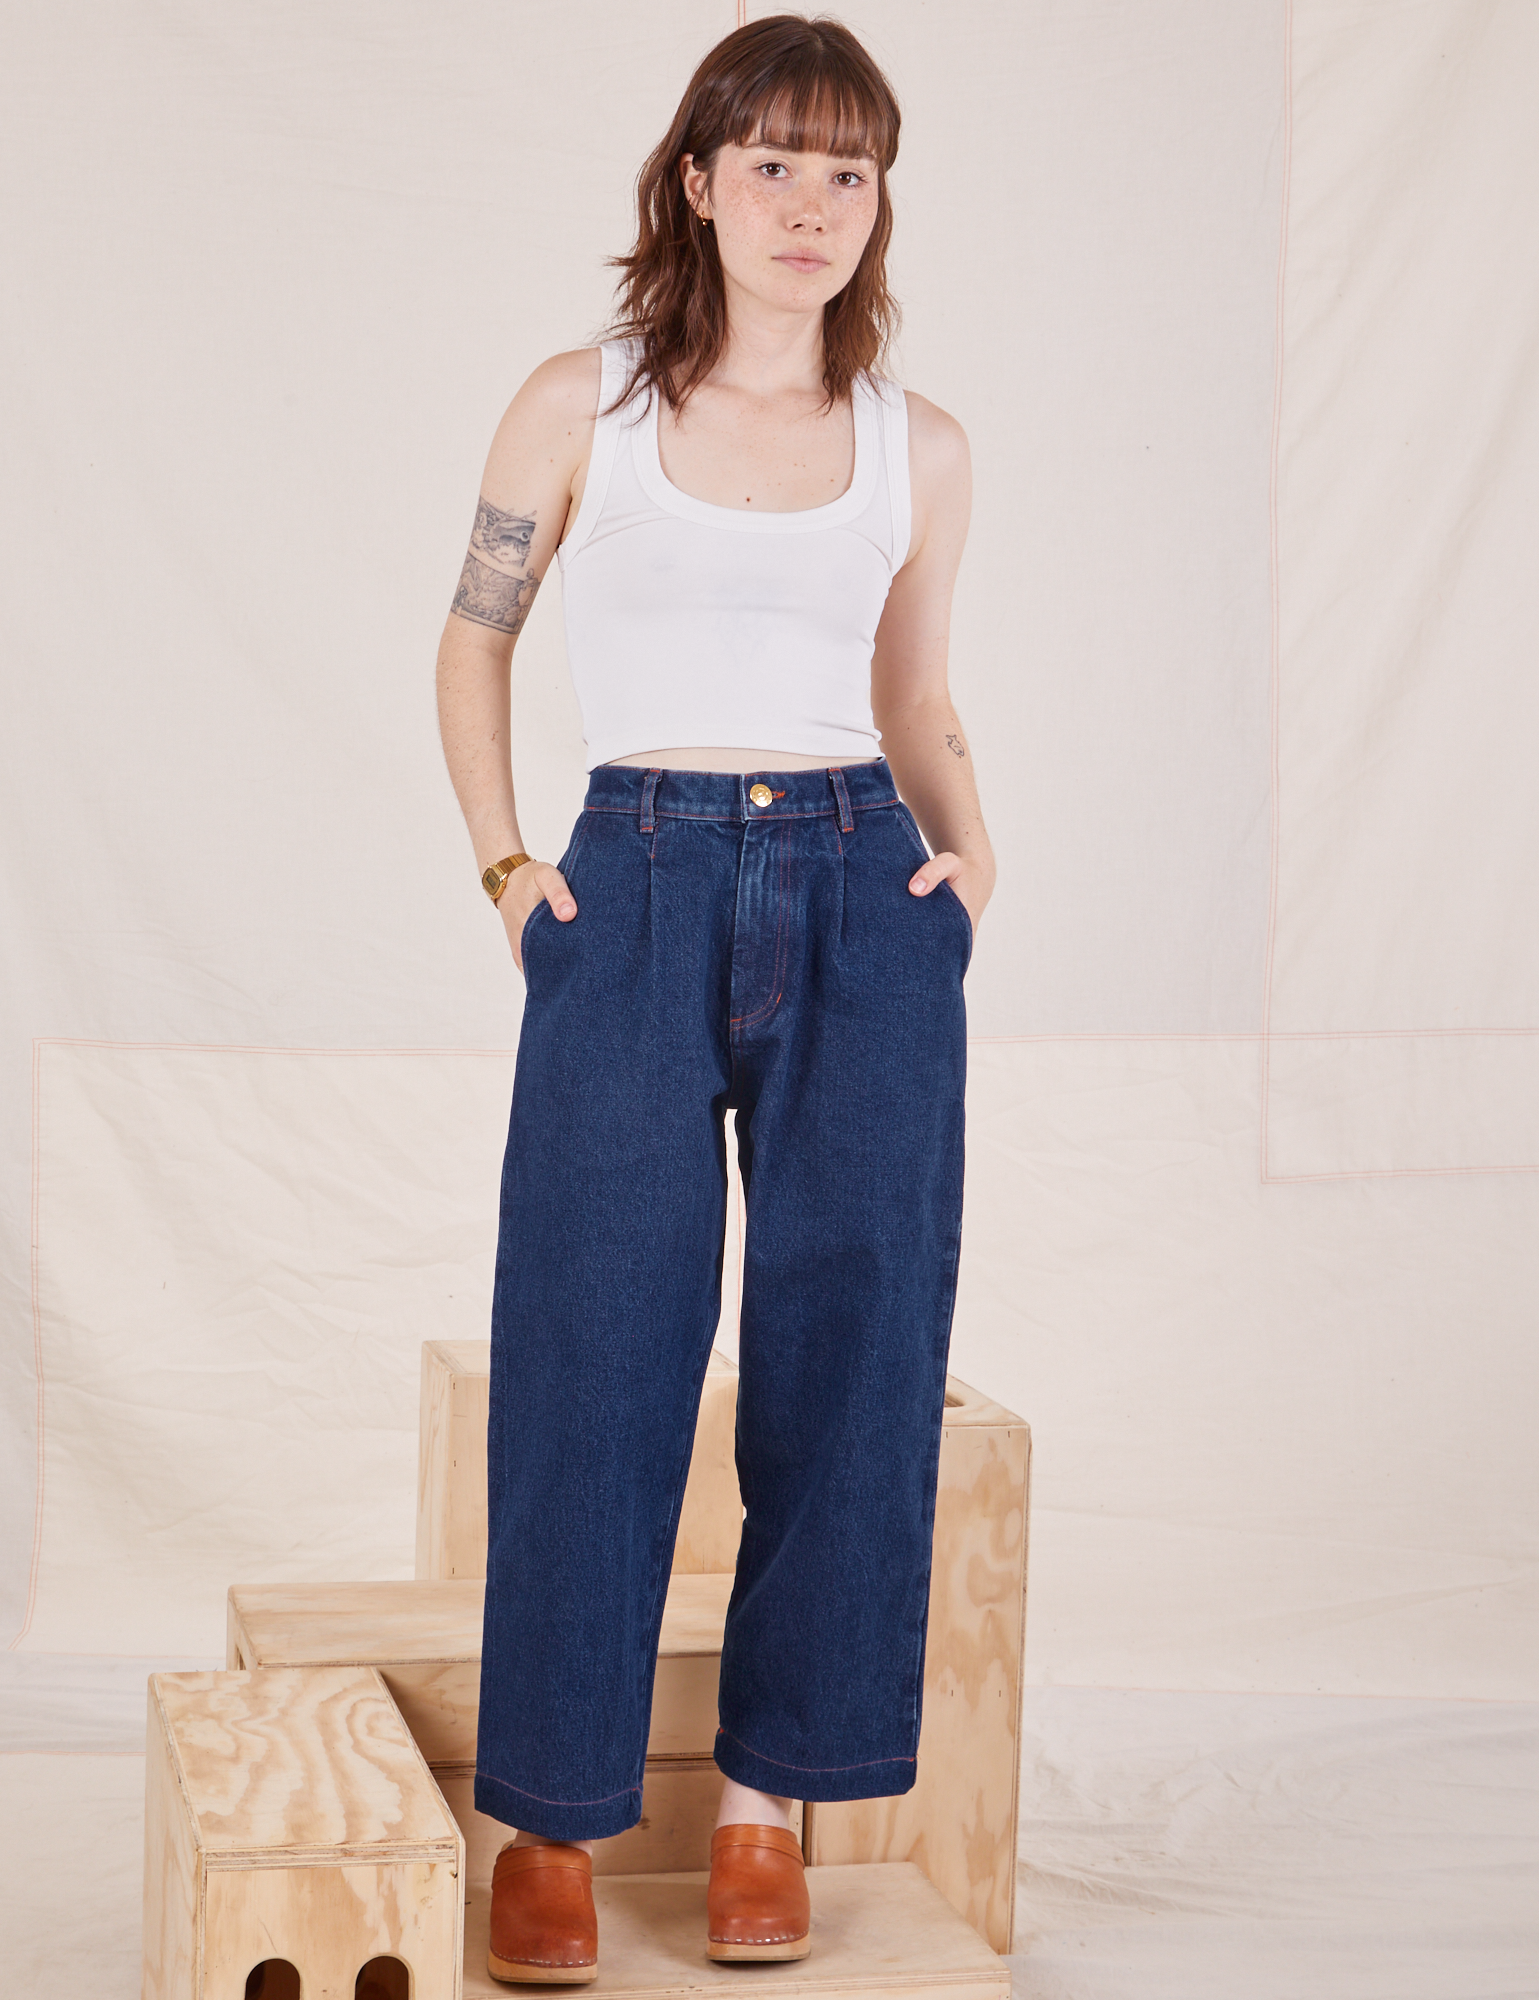 Hana is 5&#39;3&quot; and wearing XXS Petite Denim Trouser Jeans in Dark Wash paired with vintage off-white Cropped Tank Top